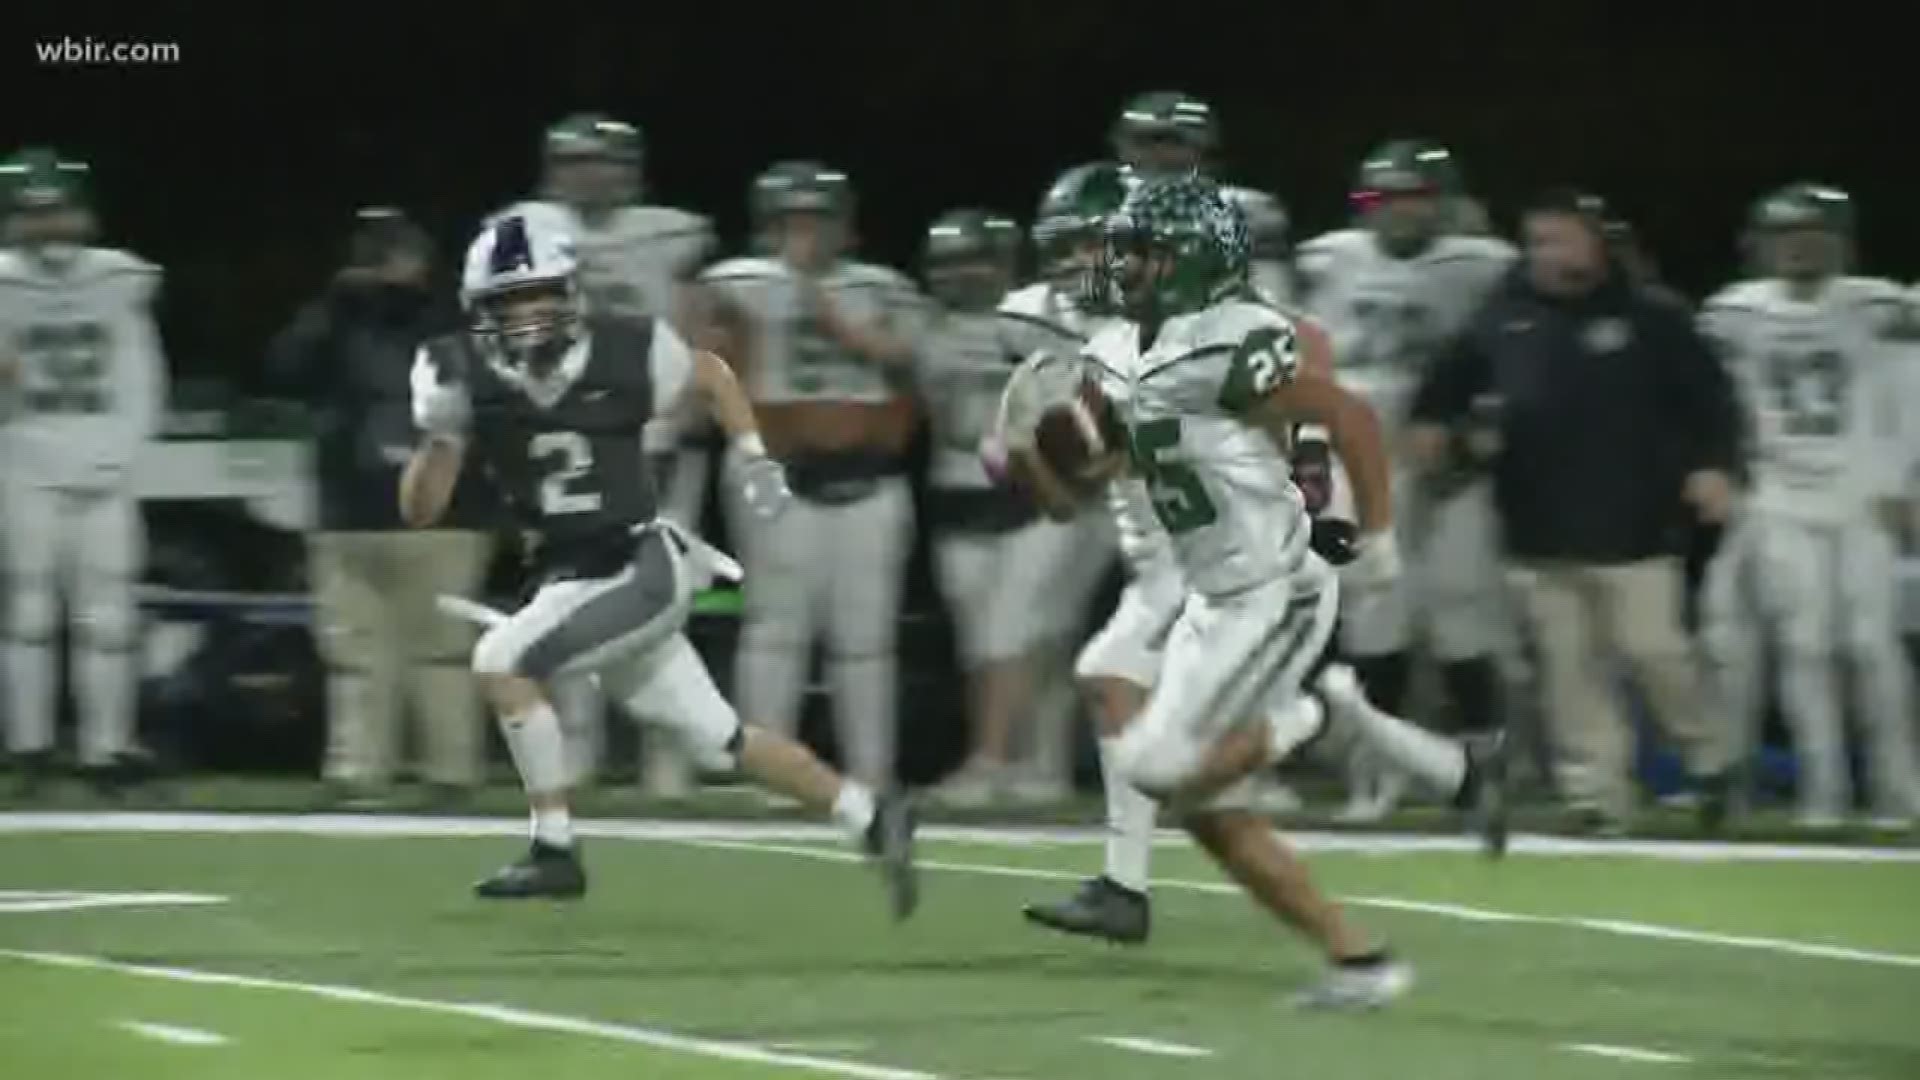 Greeneville knocks Anderson County out of the playoffs with a second round playoff victory.